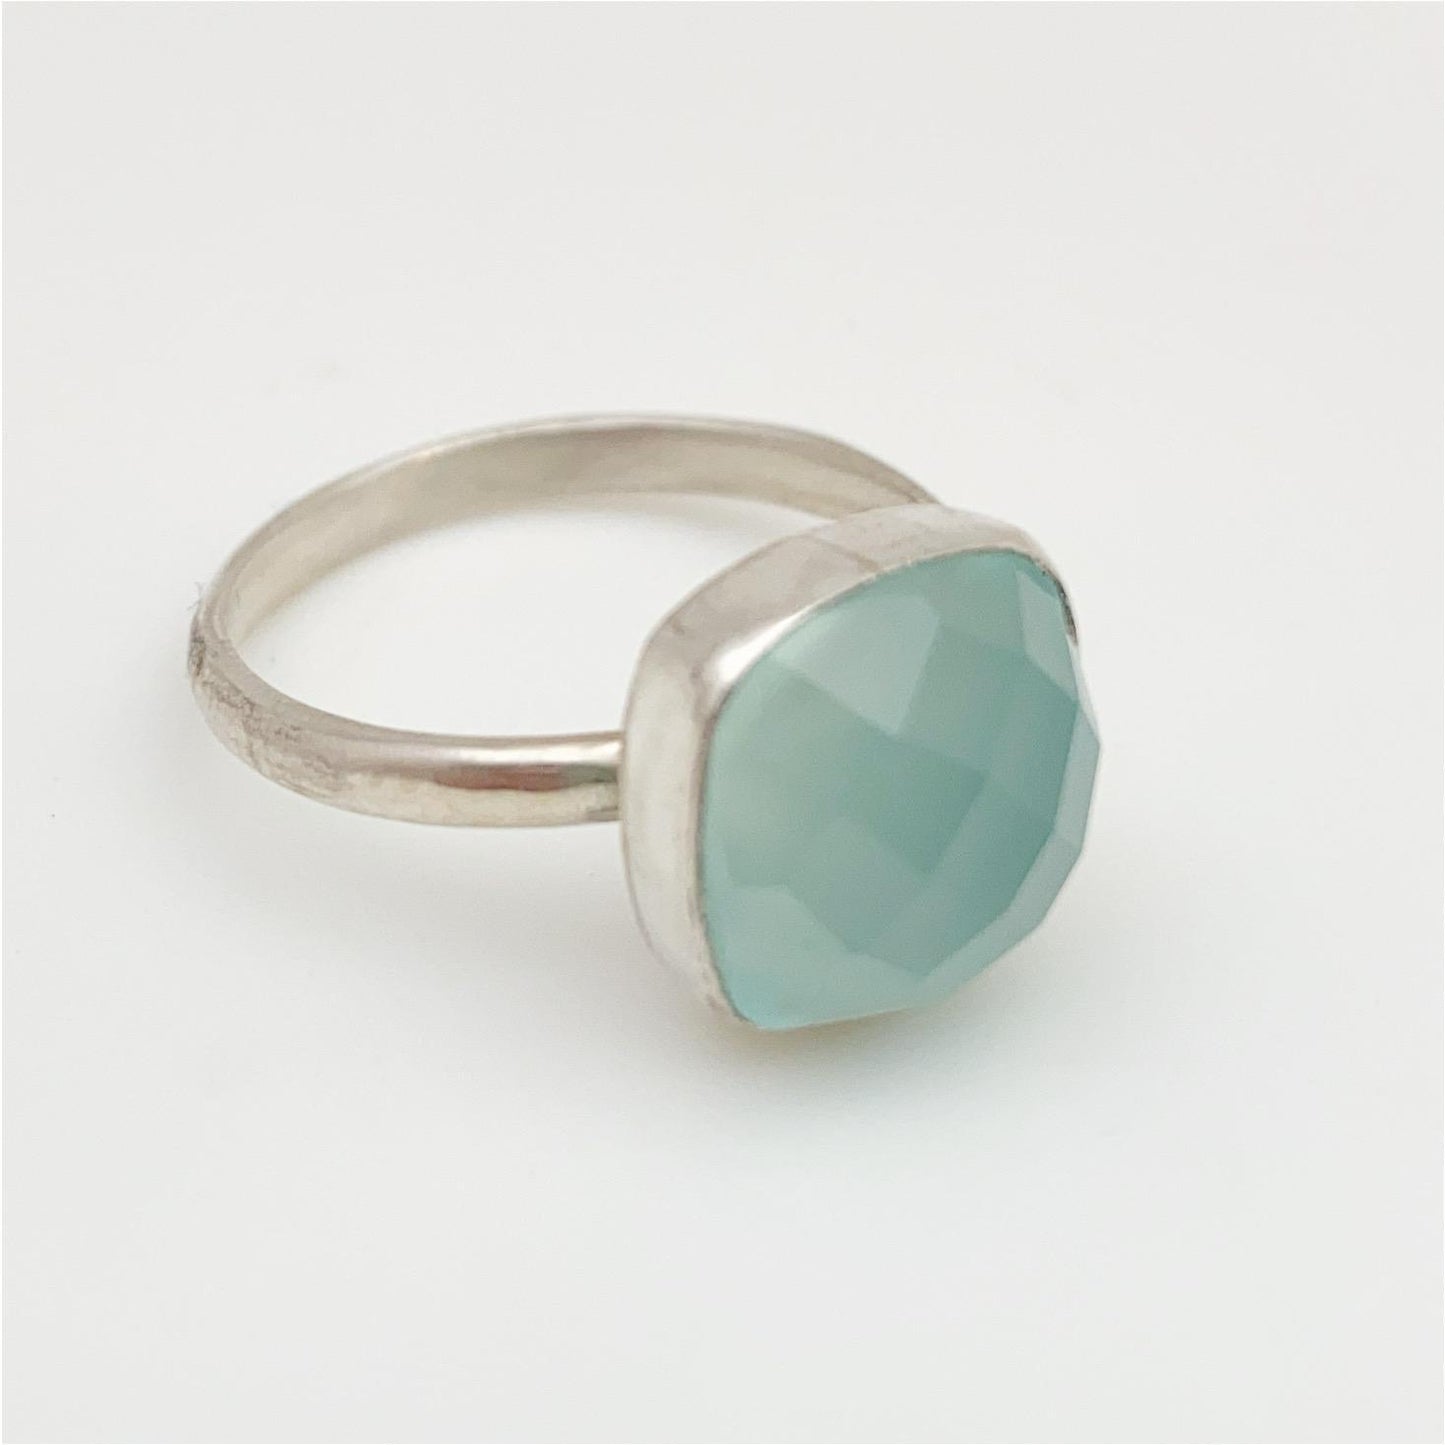 Ring - Blue Chalcedony in Sterling